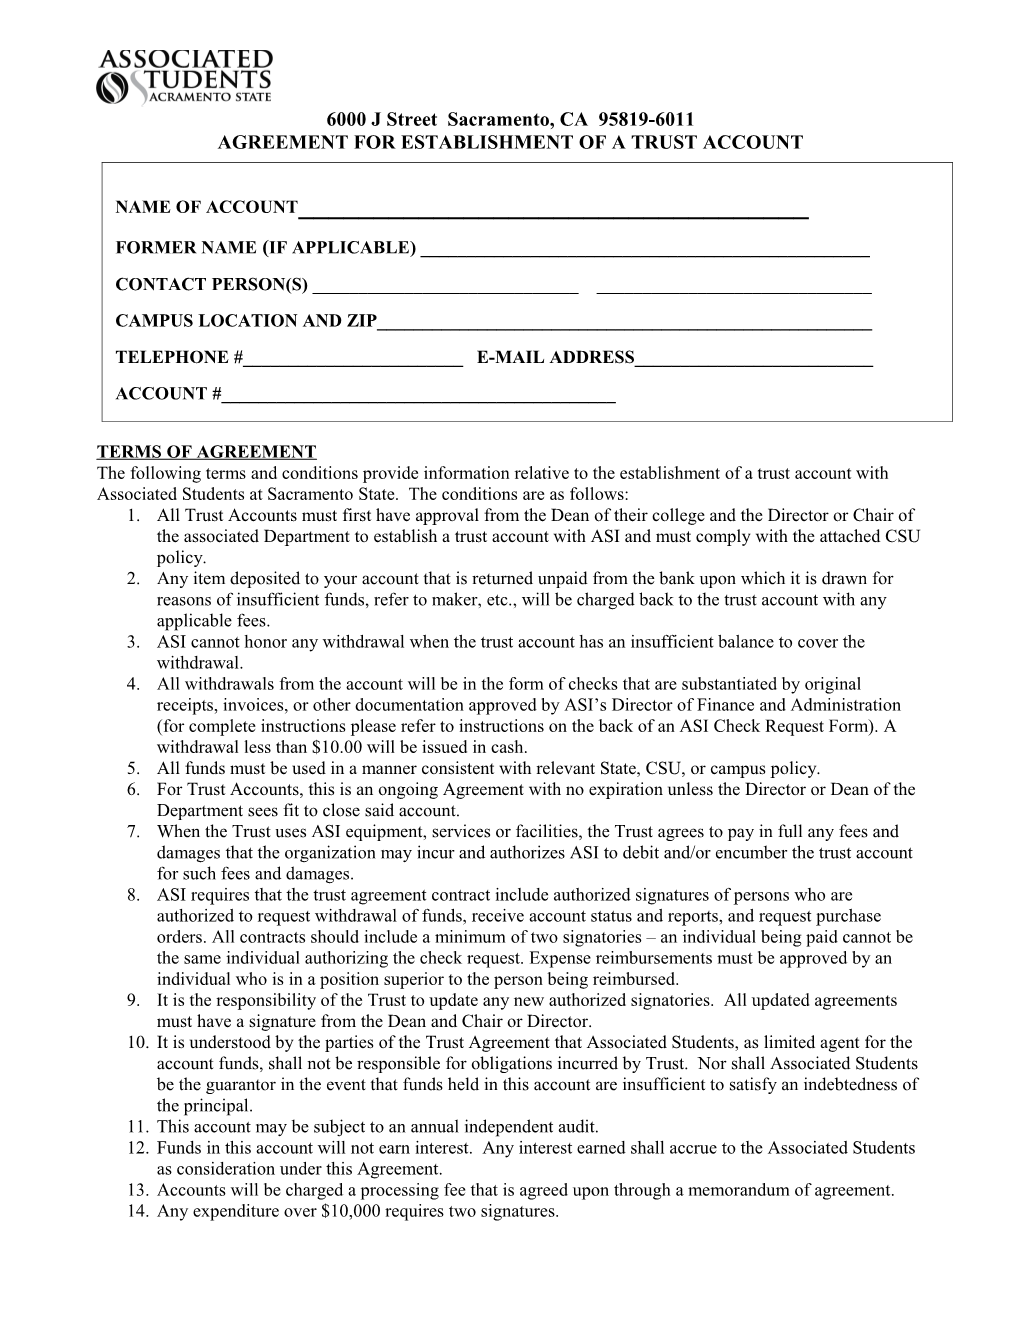 Agreement for Establishment of a Trust Account